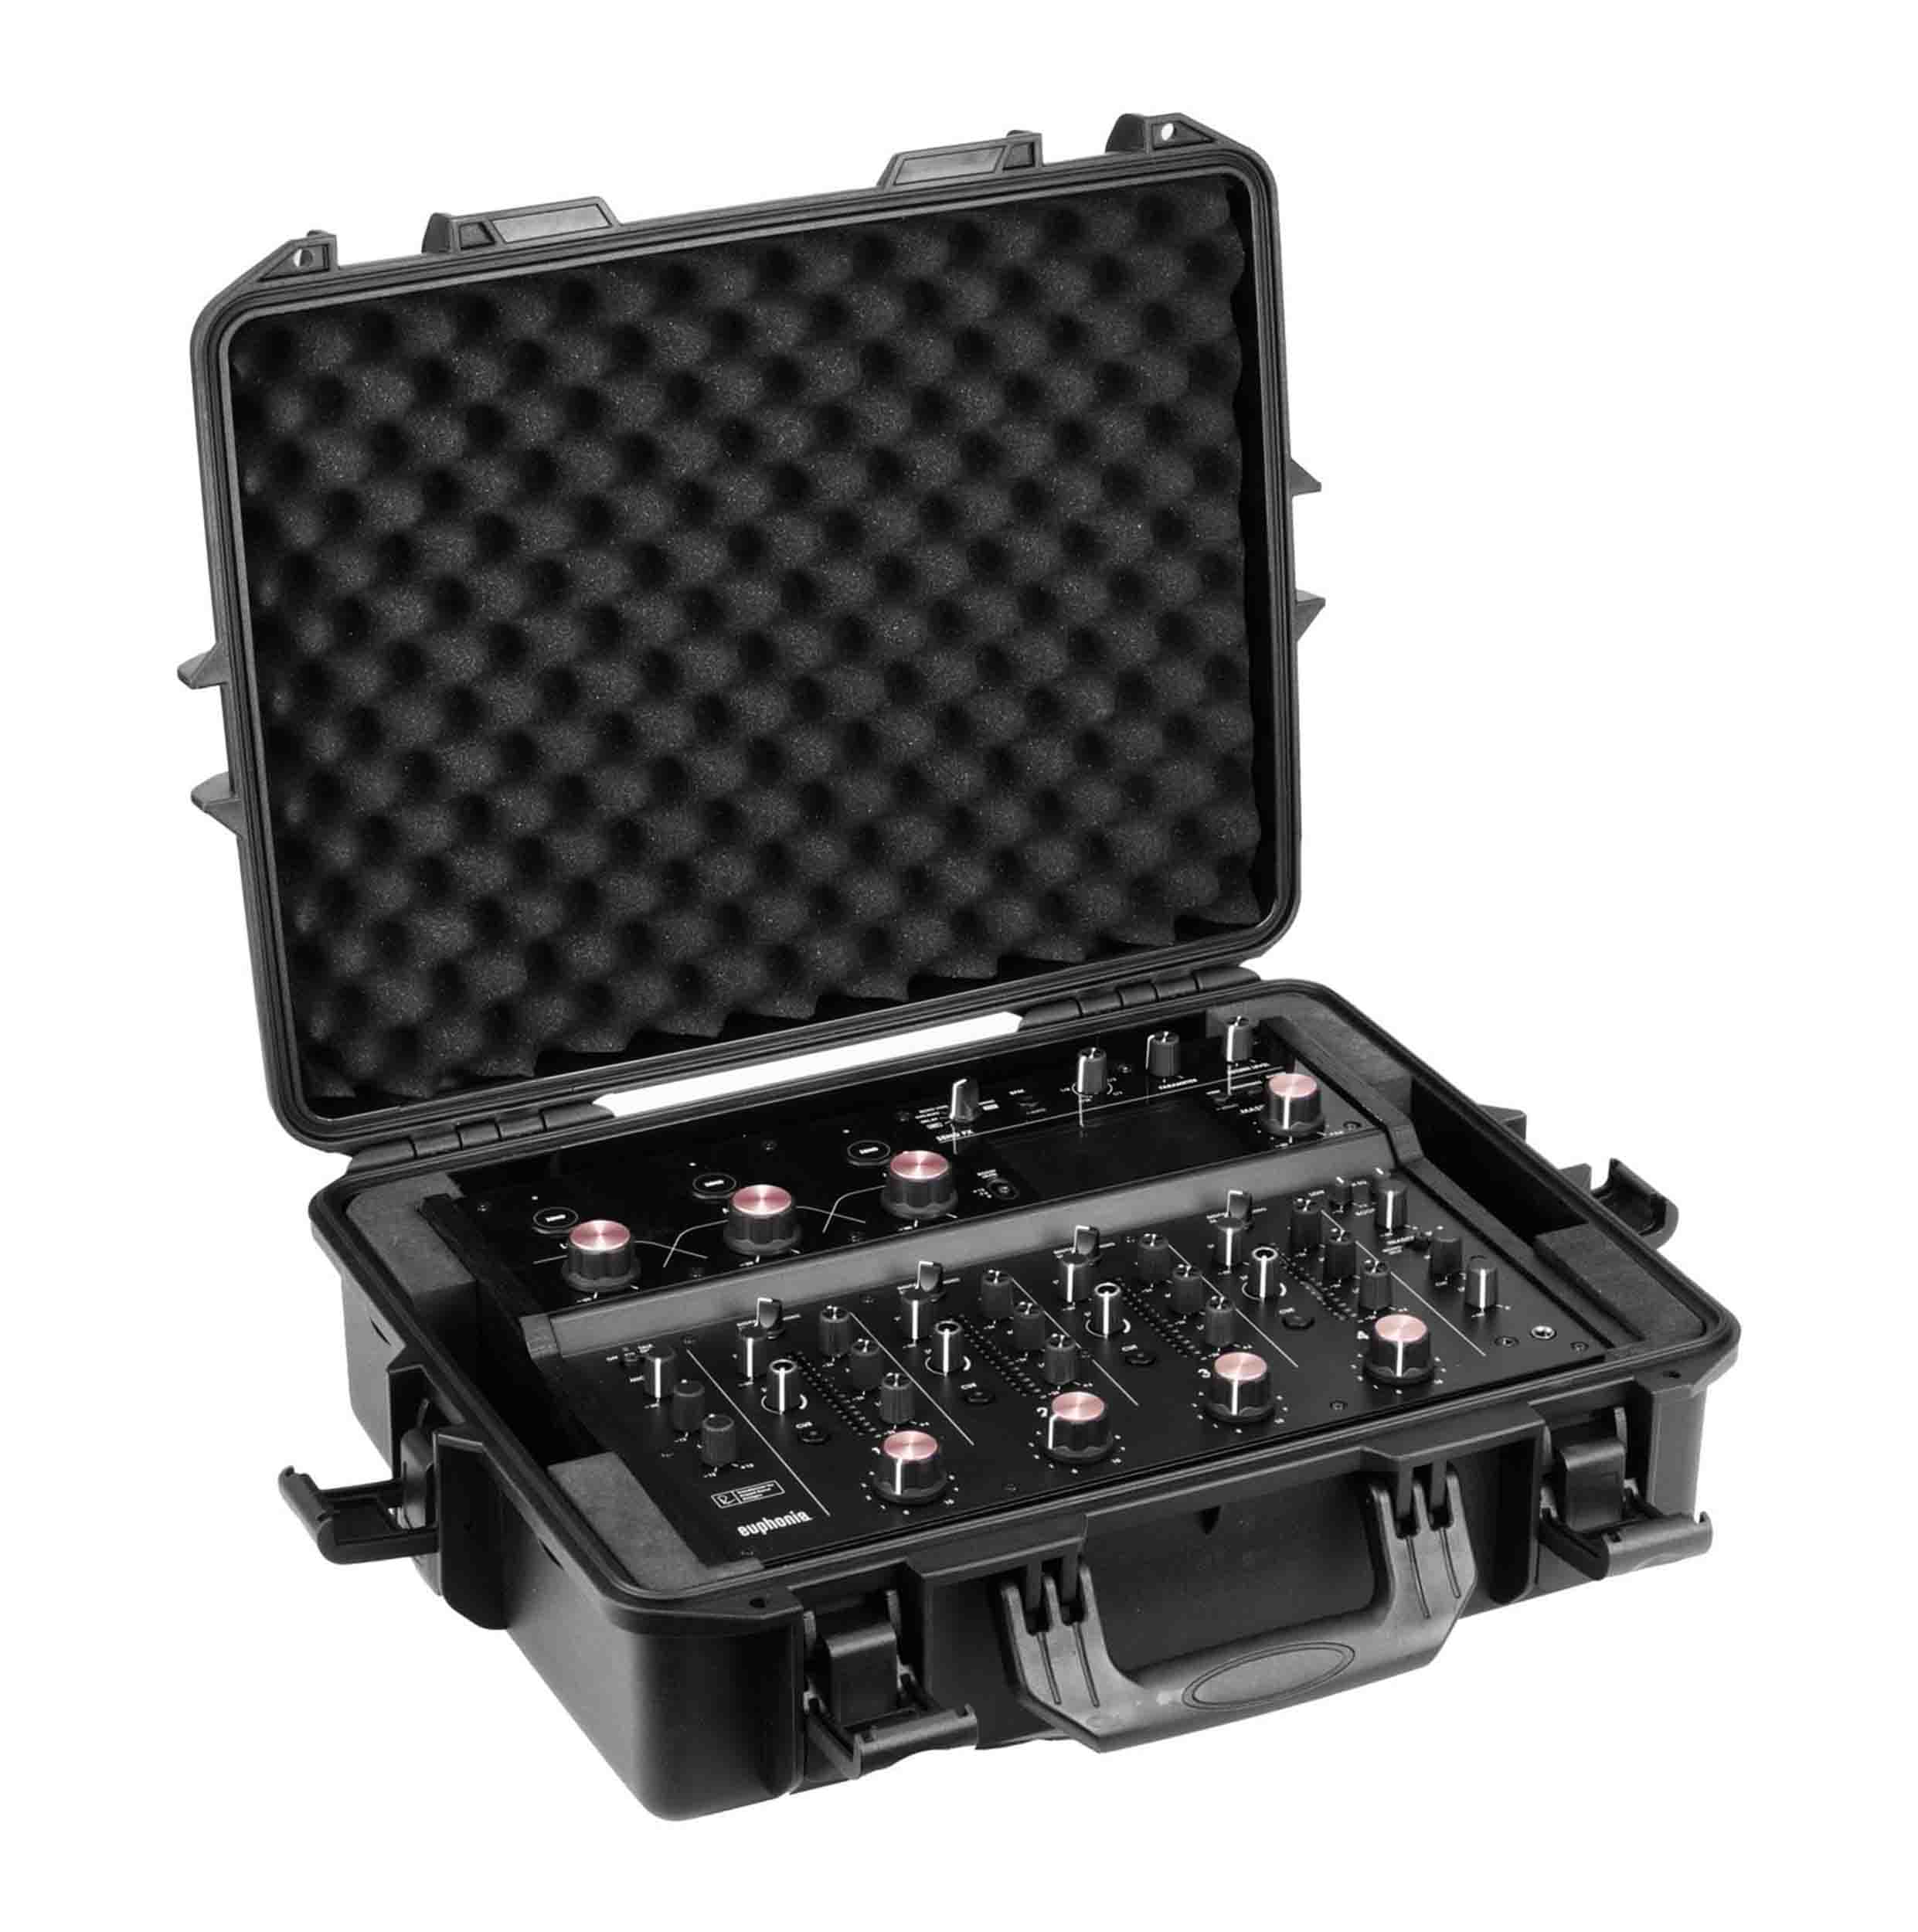 Odyssey VUATEUPHONIA, Watertight Dust-Proof Injection-Molded Case for AlphaTheta Euphonia DJ Mixer by Odyssey